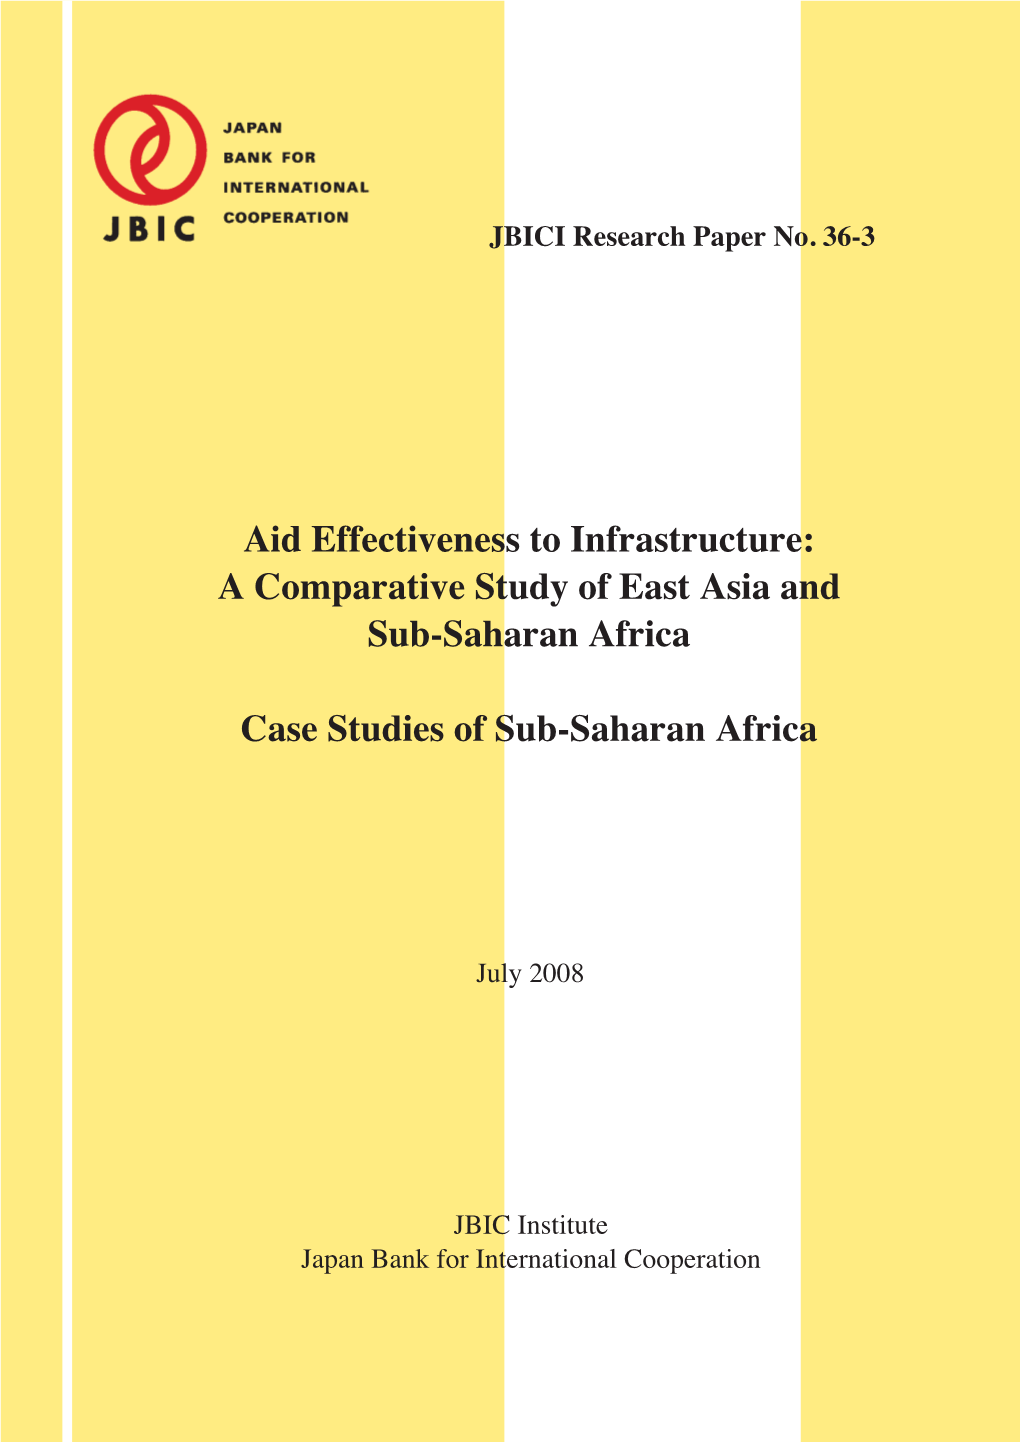 A Comparative Study of East Asia and Sub-Saharan Africa Case